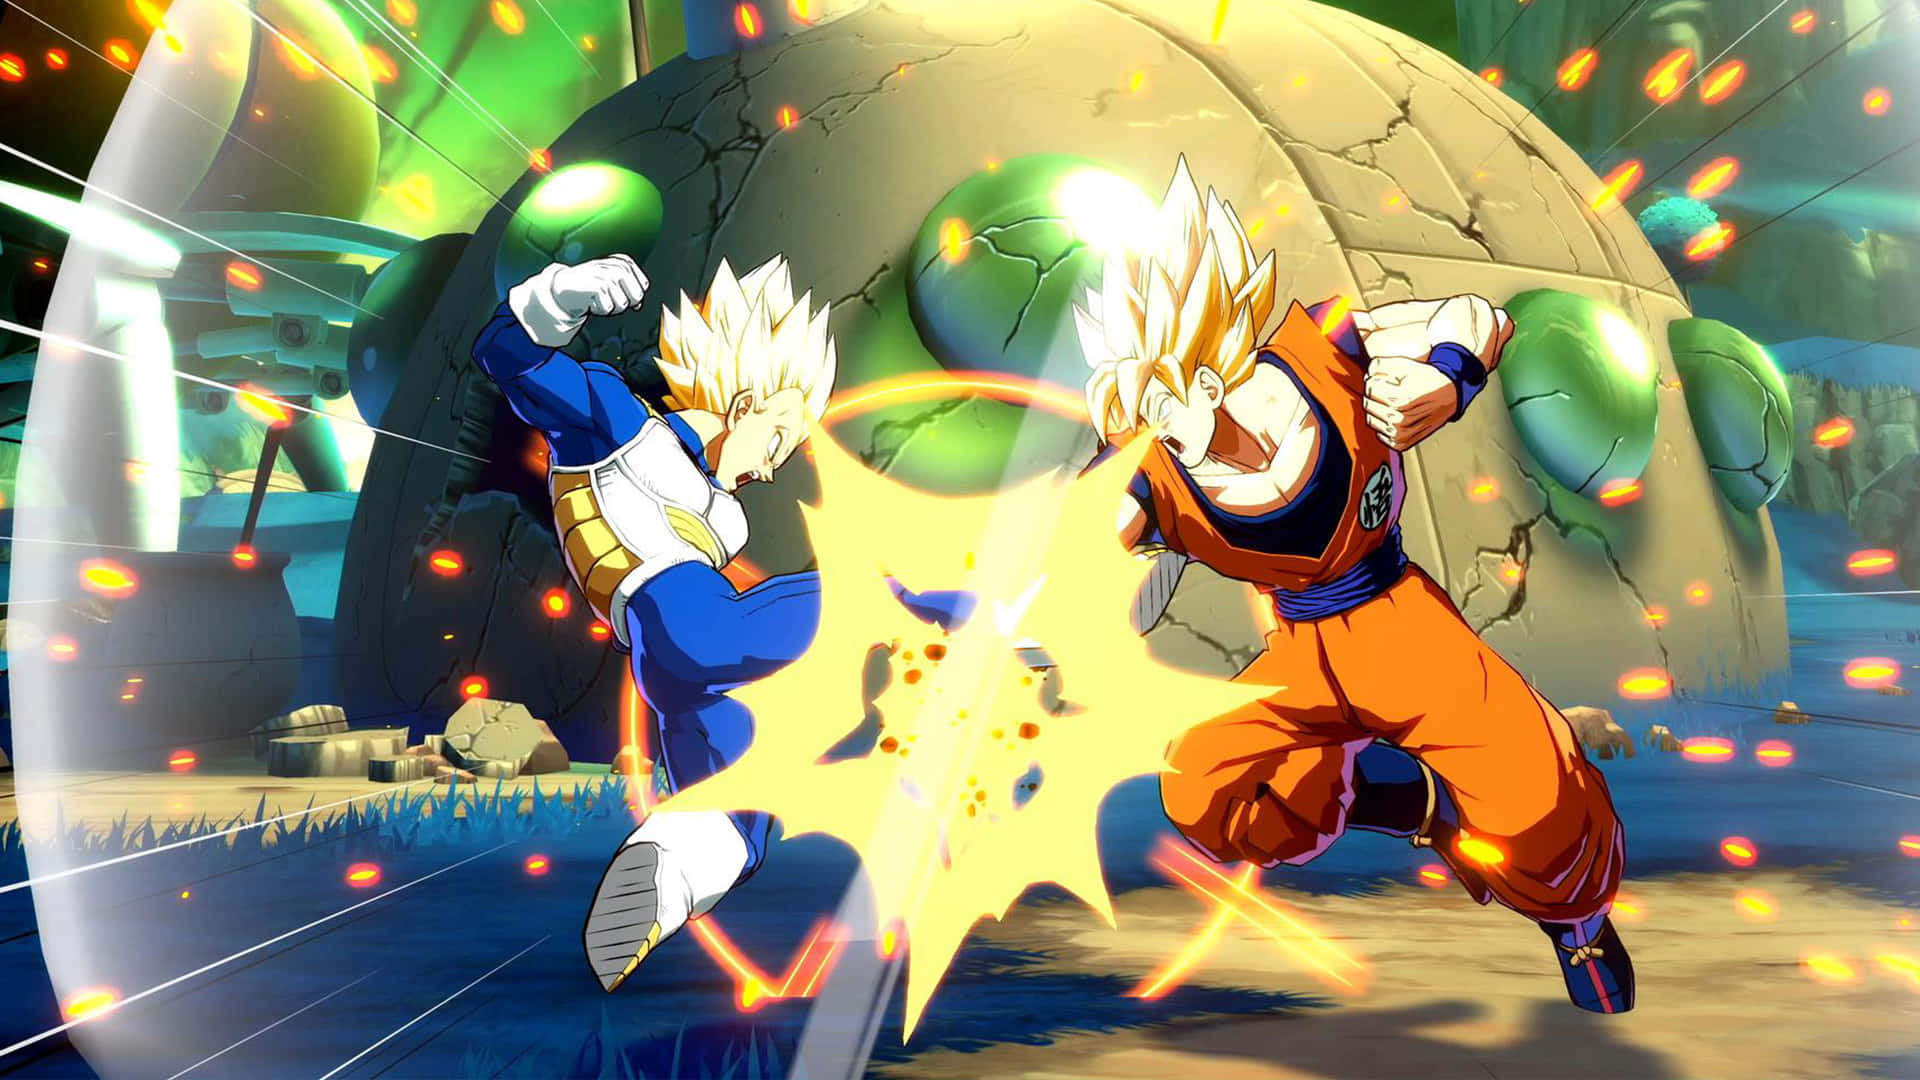 Level up your gaming experience with the new line of Dragon Ball Z video games Wallpaper